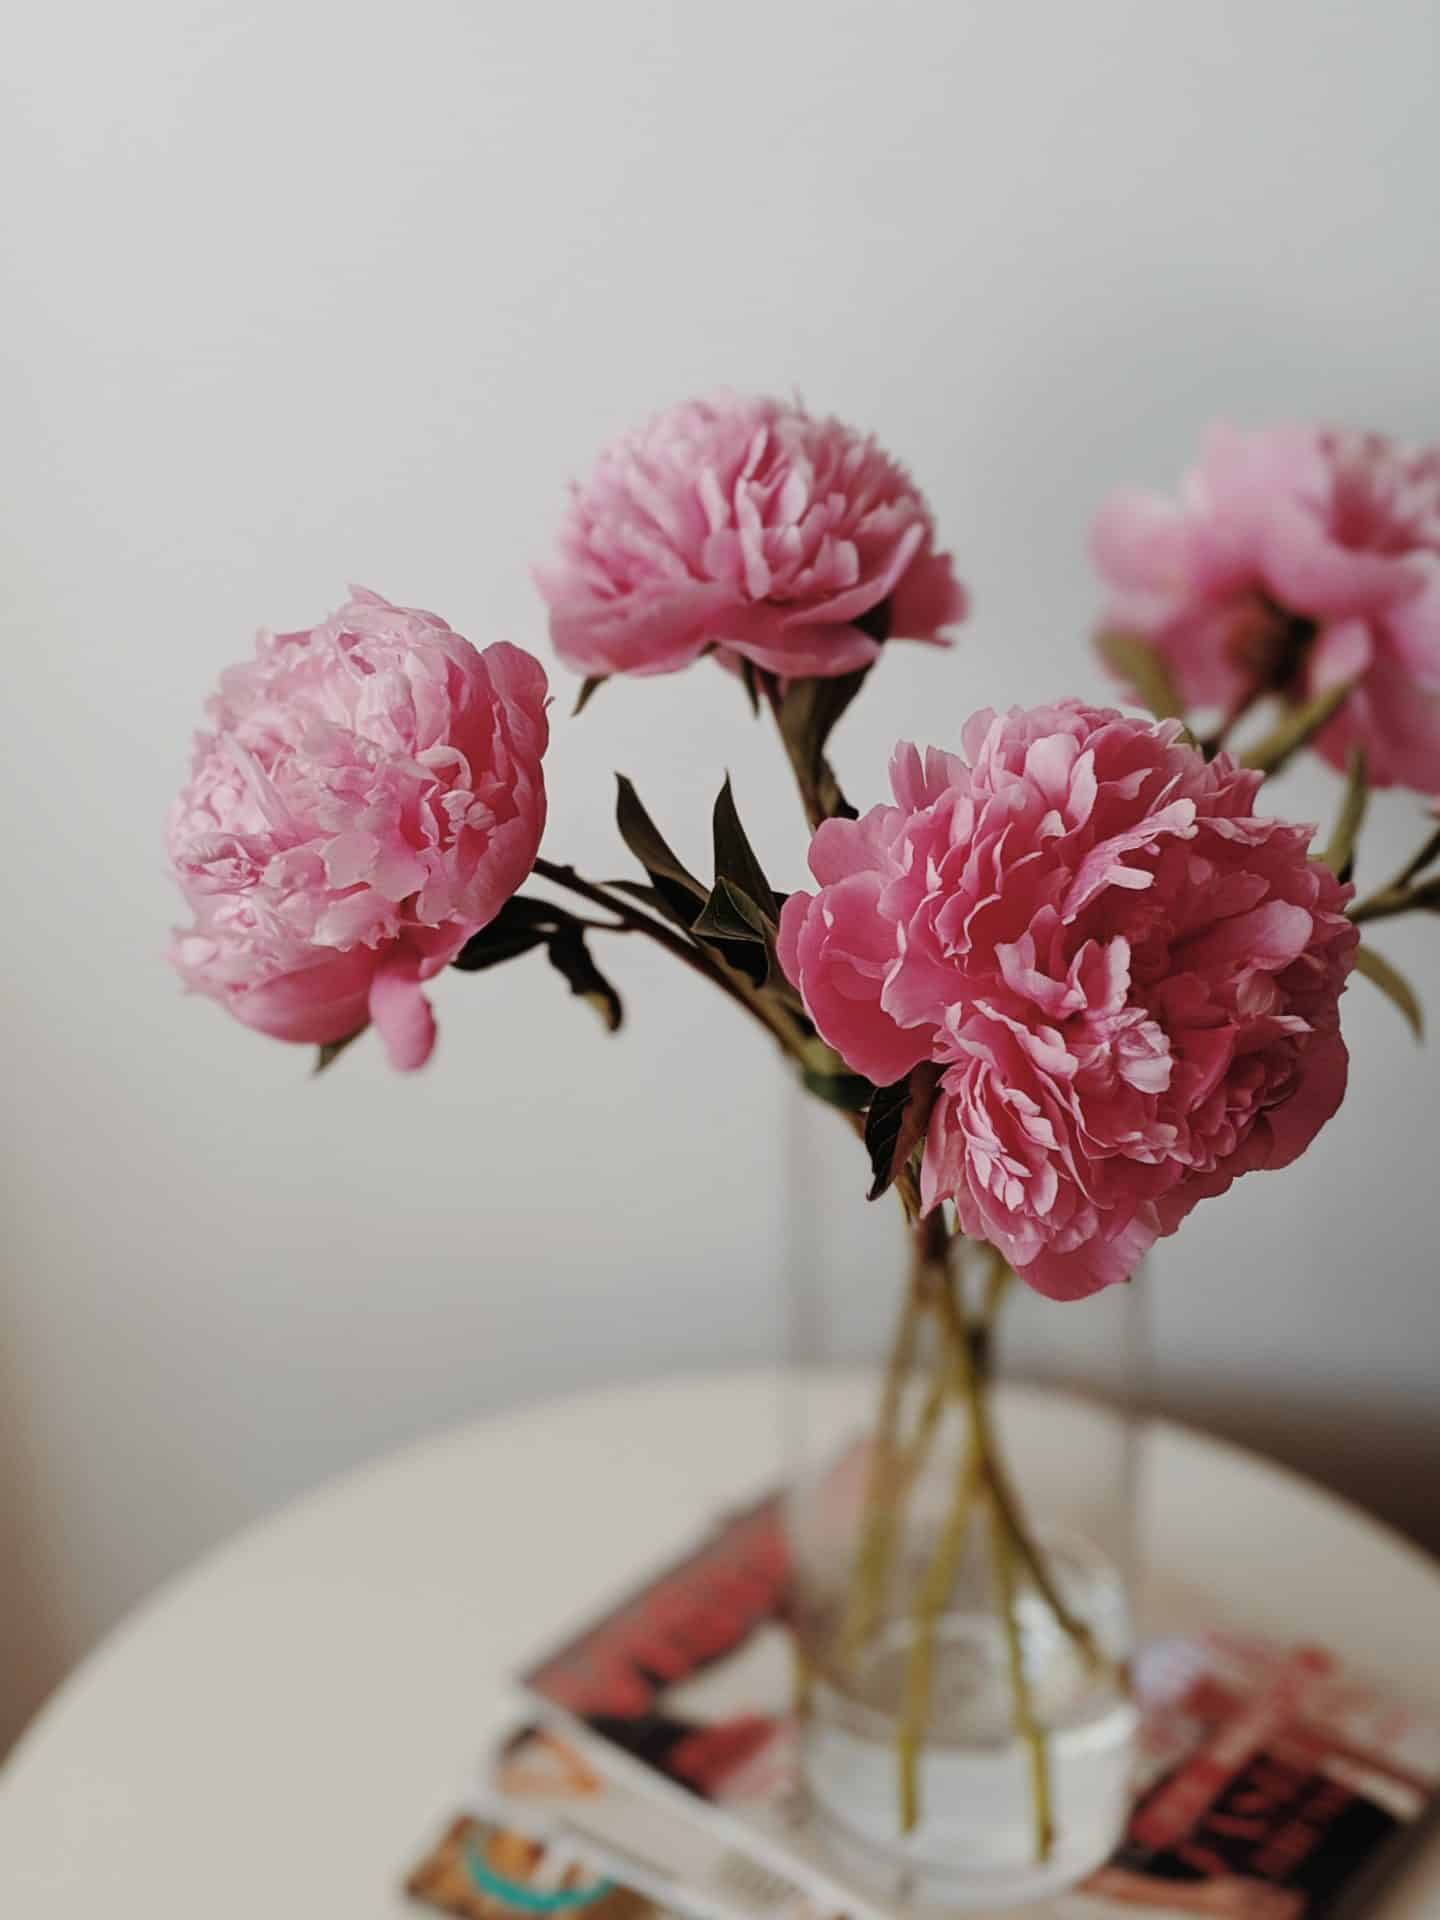 decorating with plants - pink peonies